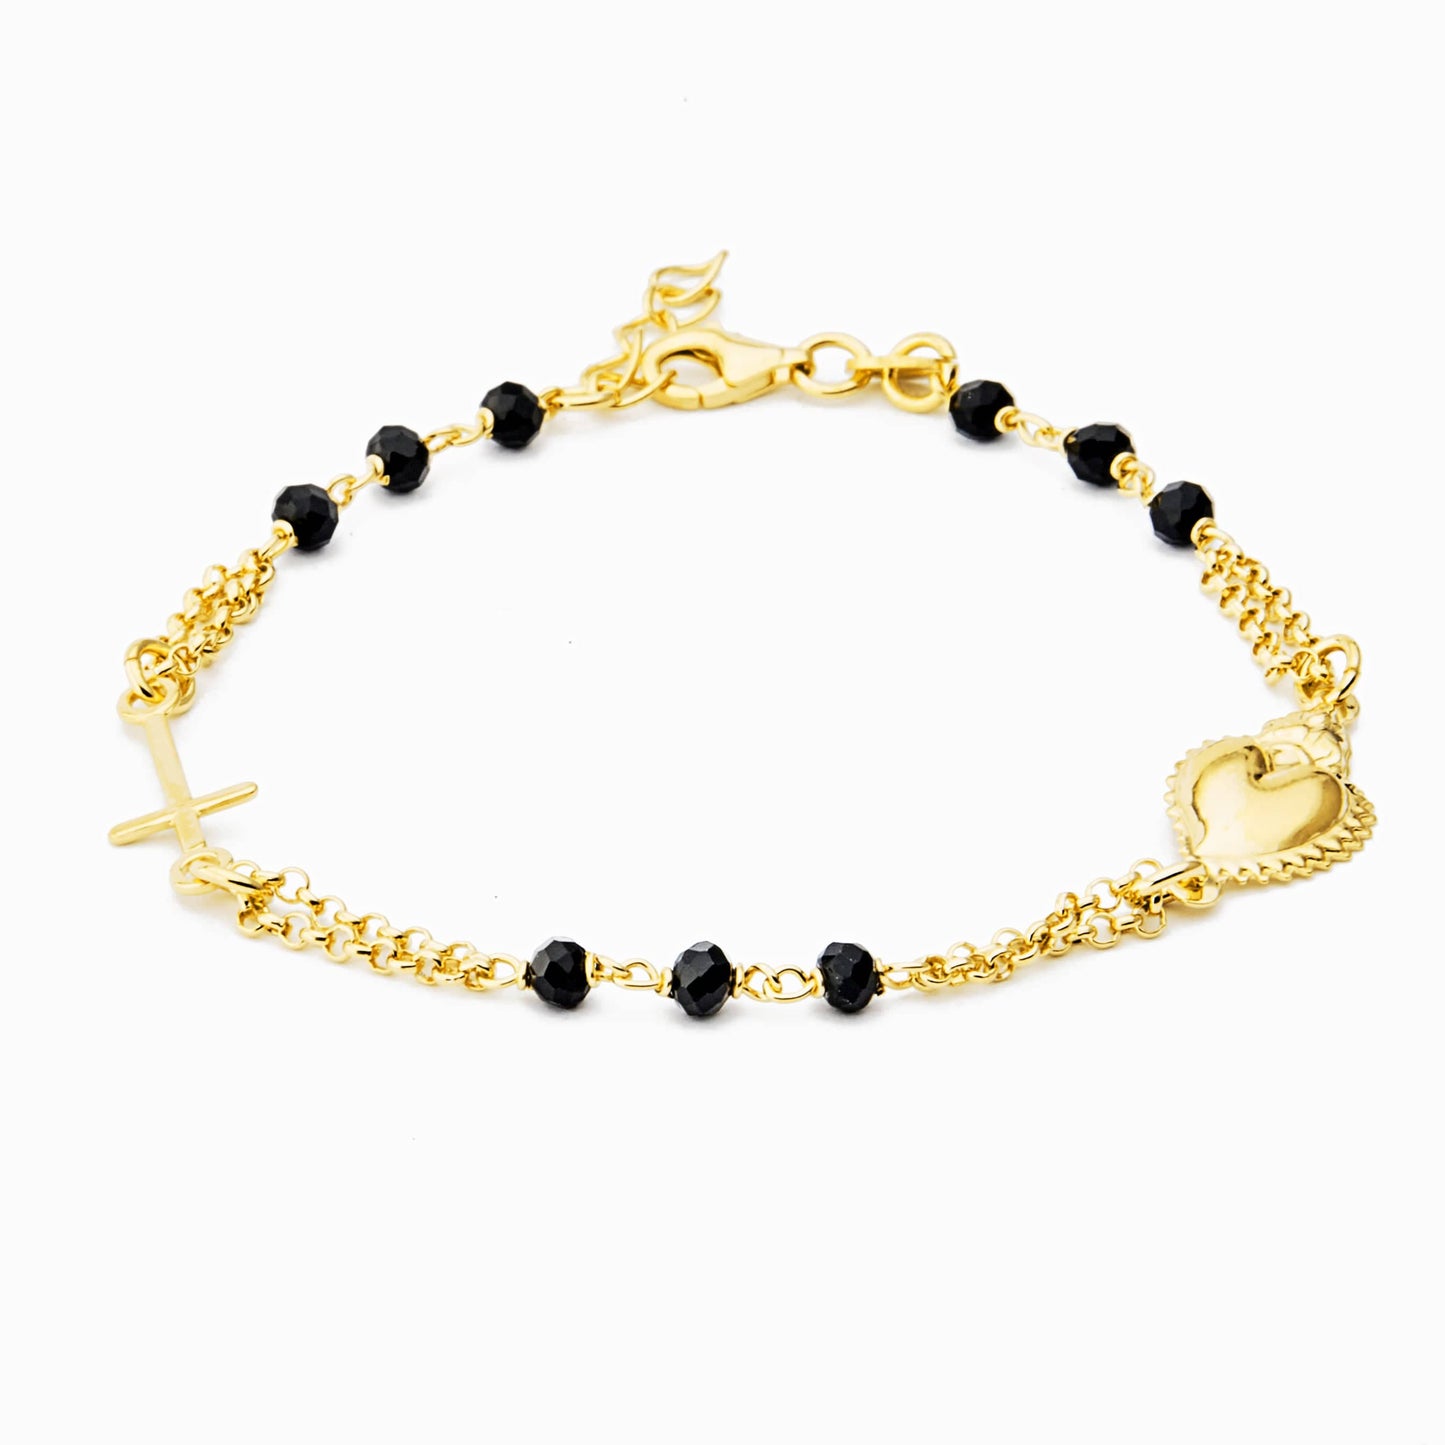 MONDO CATTOLICO Prayer Beads Gold / Cm 17.5 (6.9 in) / Cm 3 (1.2 in) STERLING SILVER ROSARY BRACELET SACRED HEART BLACK FACETED BEADS